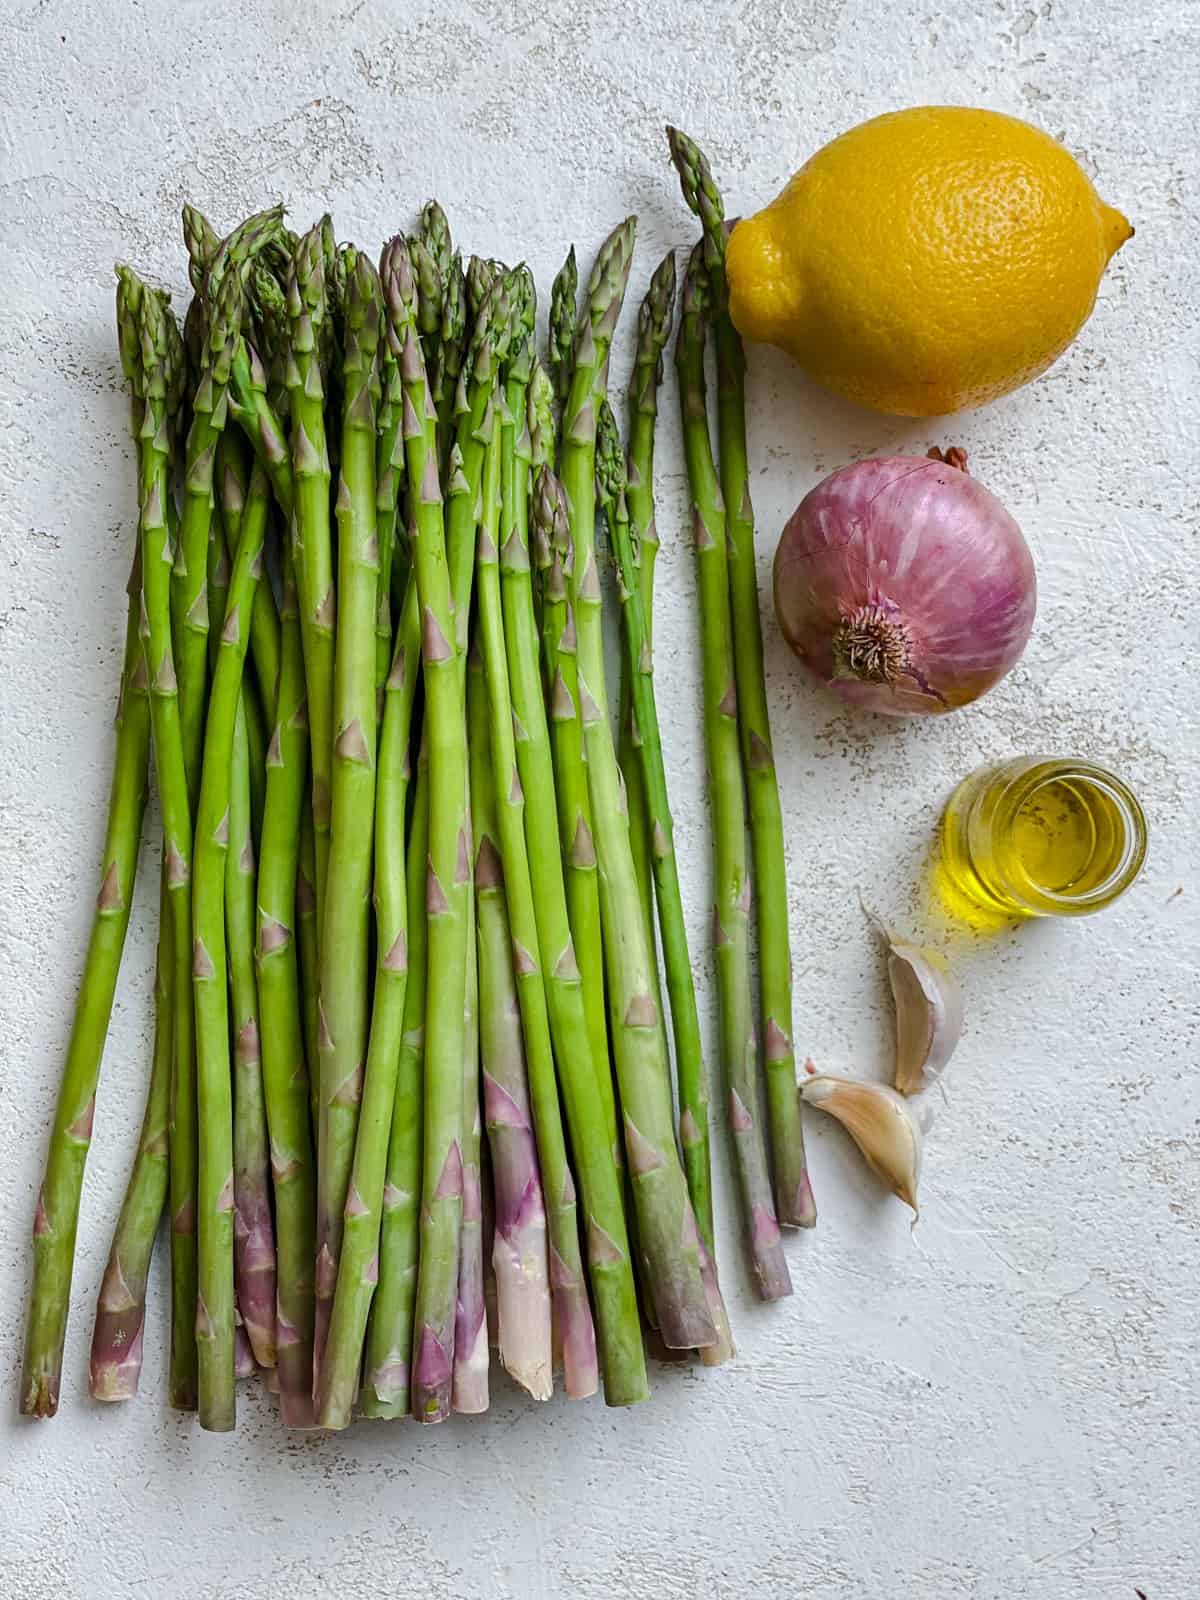 ingredients for Sauteed Asparagus with Lemon and Garlic measured out against a white surface